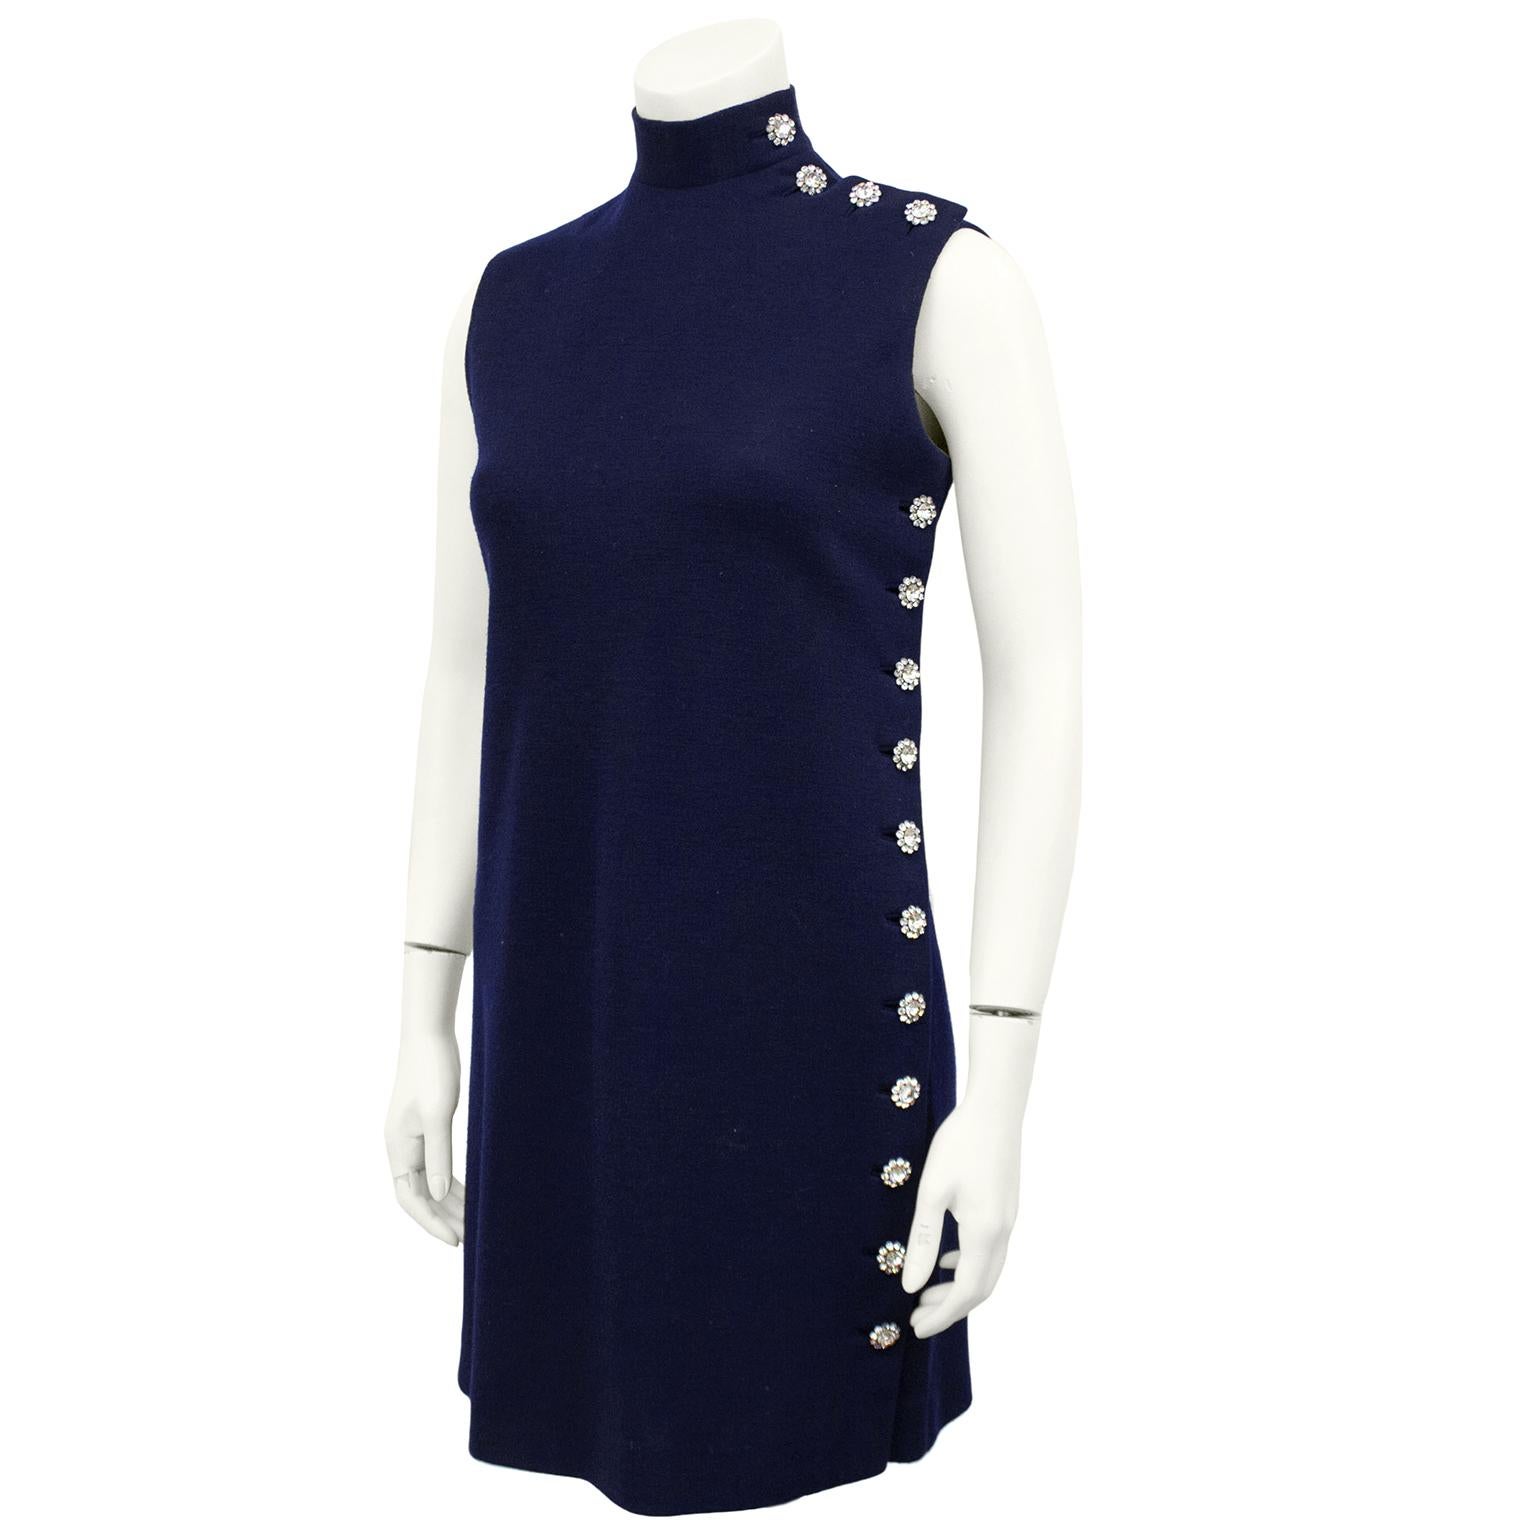 Stunning 1960's Norman Norell sleeveless turtleneck cocktail dress. Navy blue wool jersey with stunning rhinestone flower buttons at the shoulder and down the left side wearing. Subtle with the perfect amount of sparkle. Shift shape. Amazing with